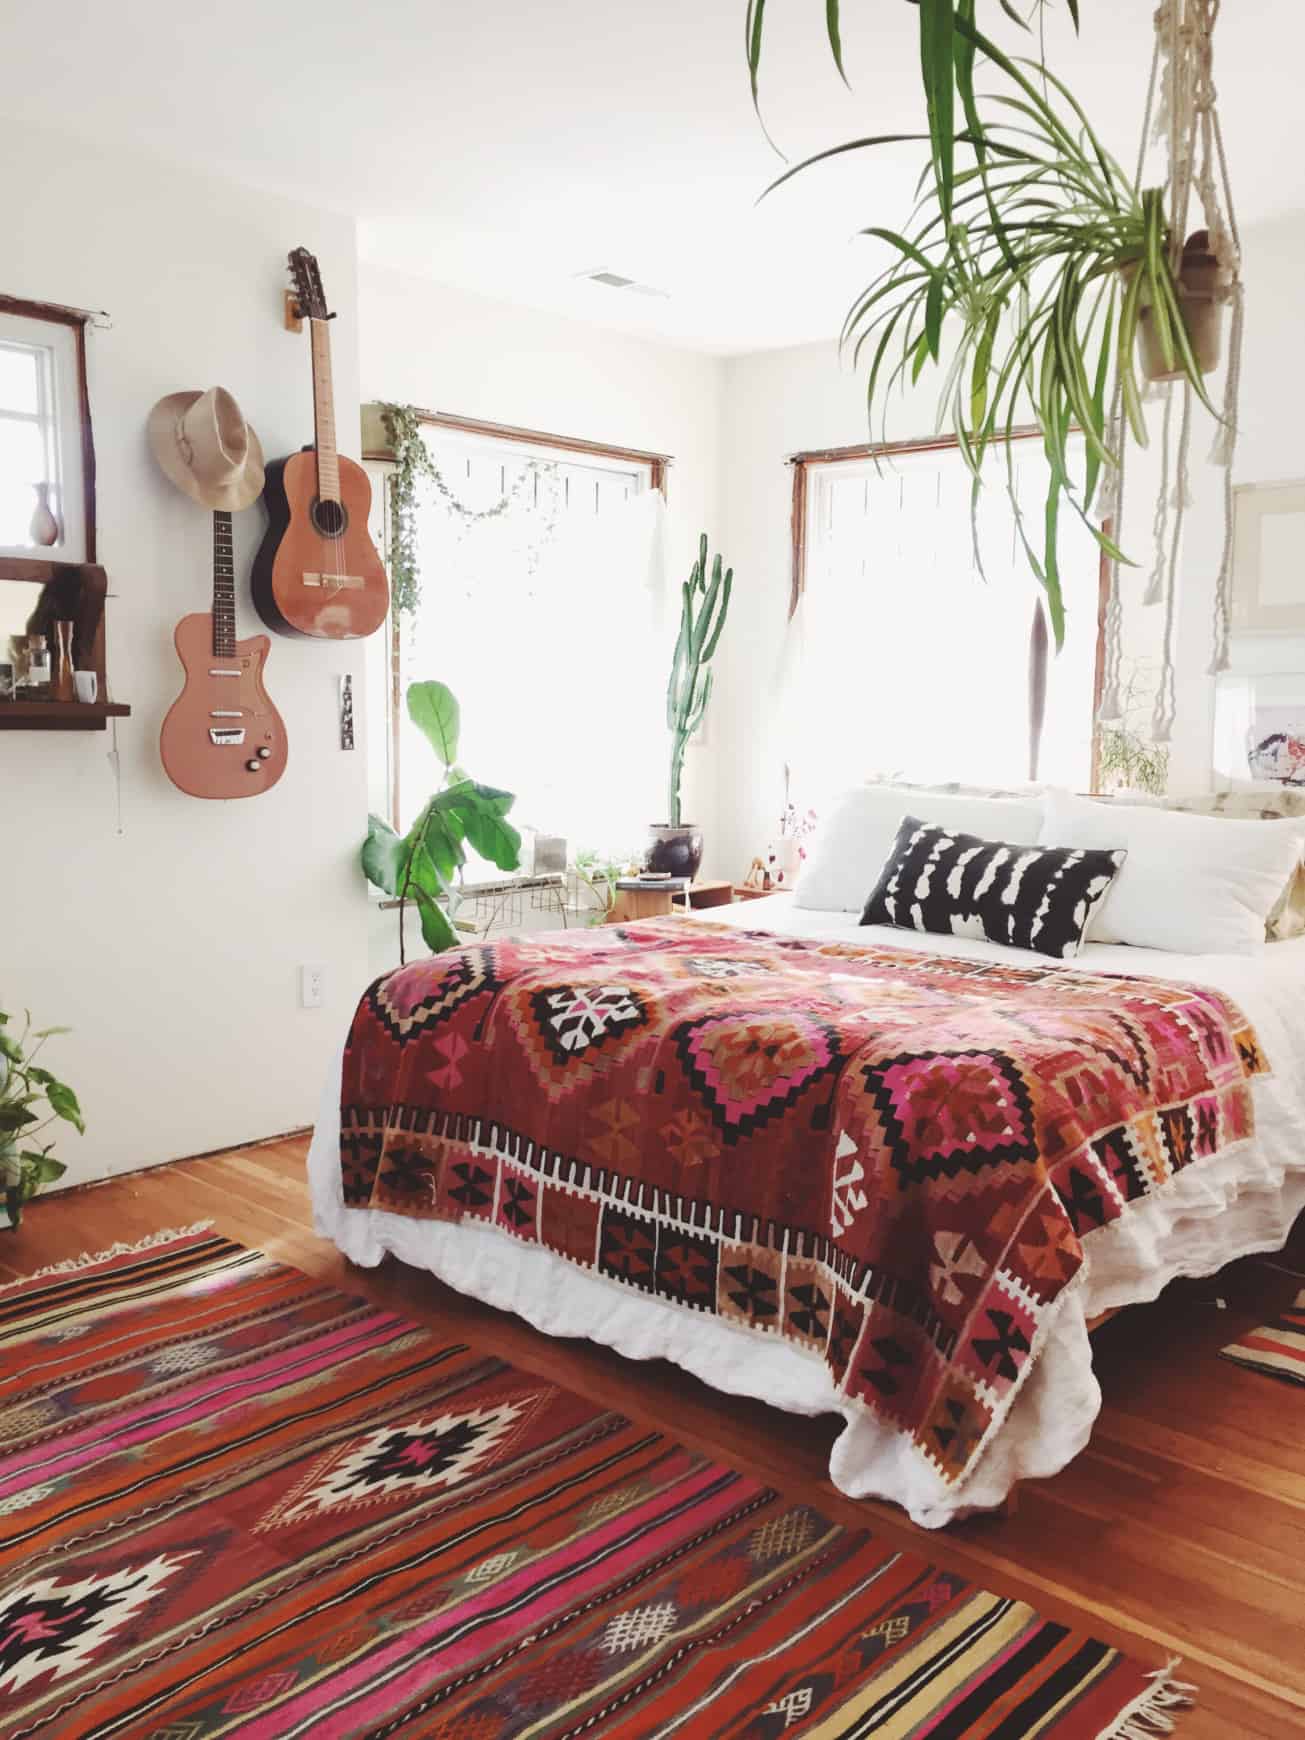 Instruments on the wall will add a bohemian feel that is also natural and even multipurpose.